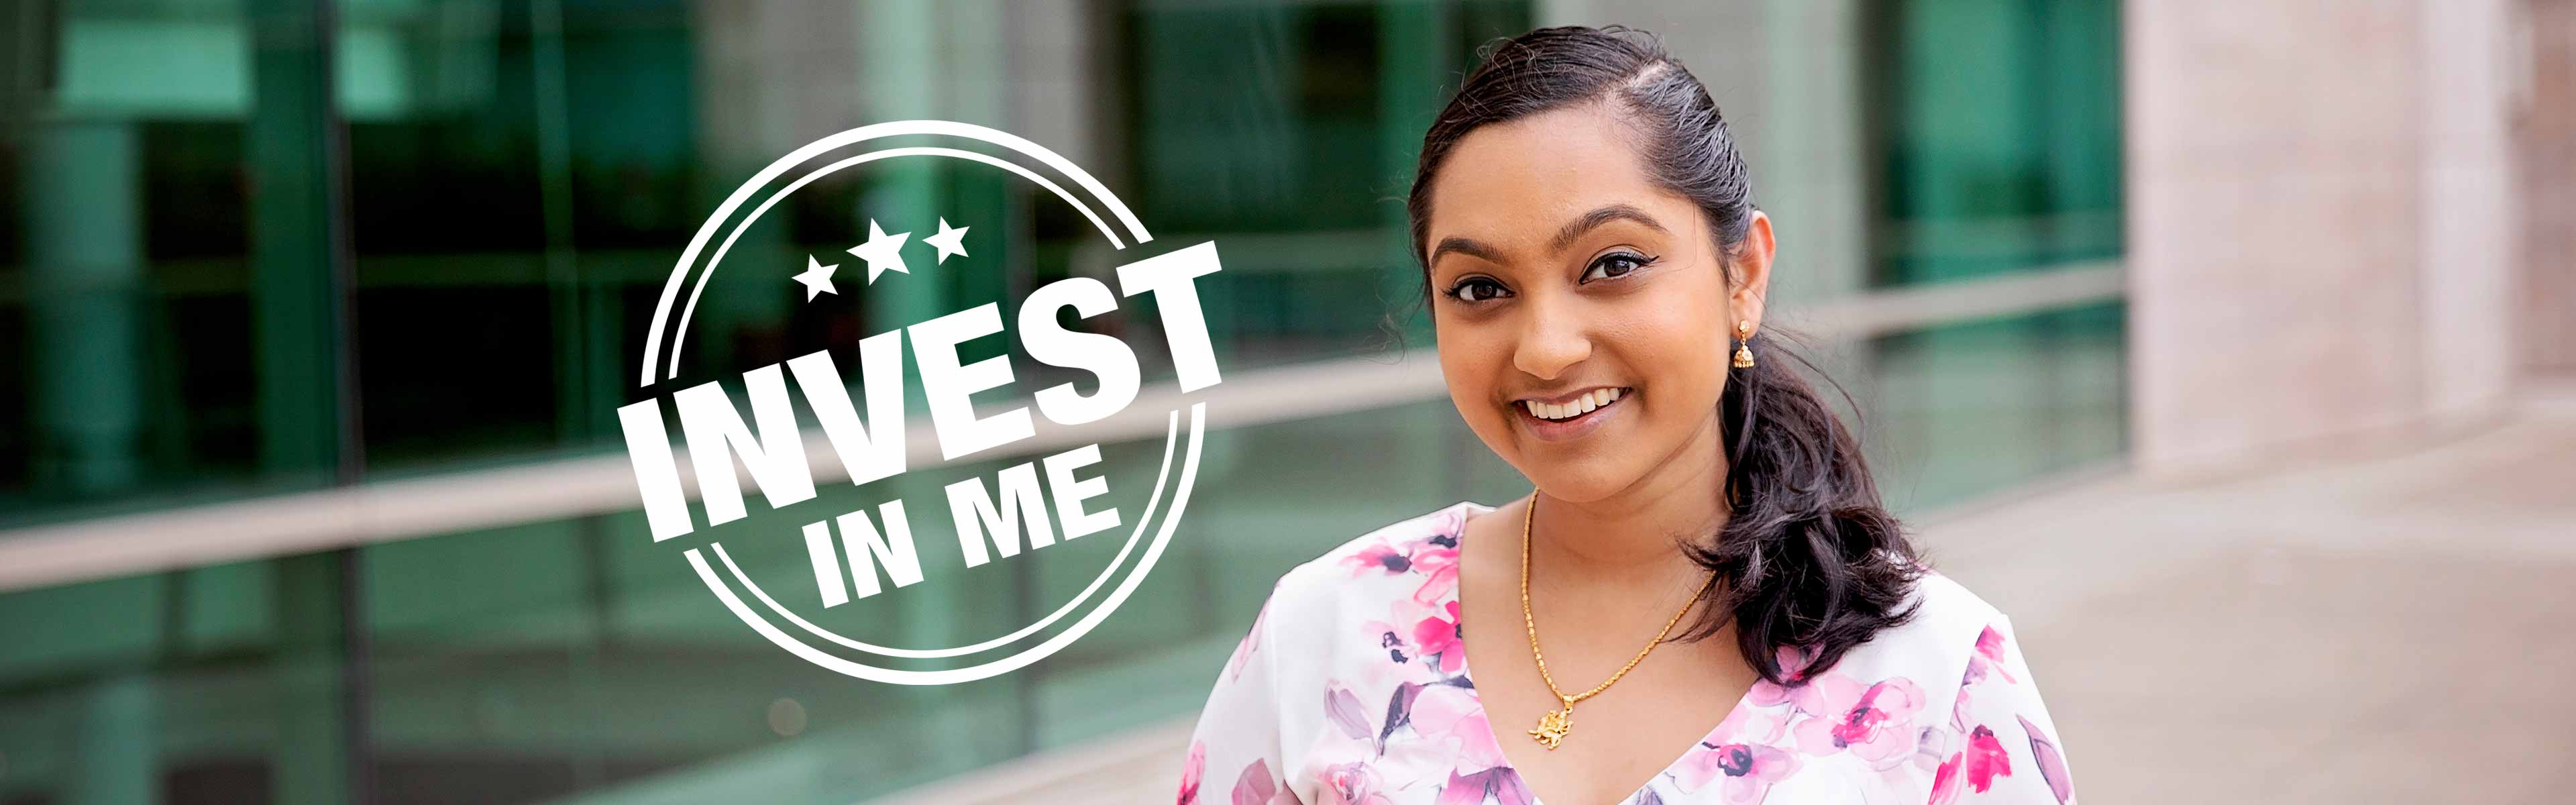 Invest in me logo and Sneha Krish